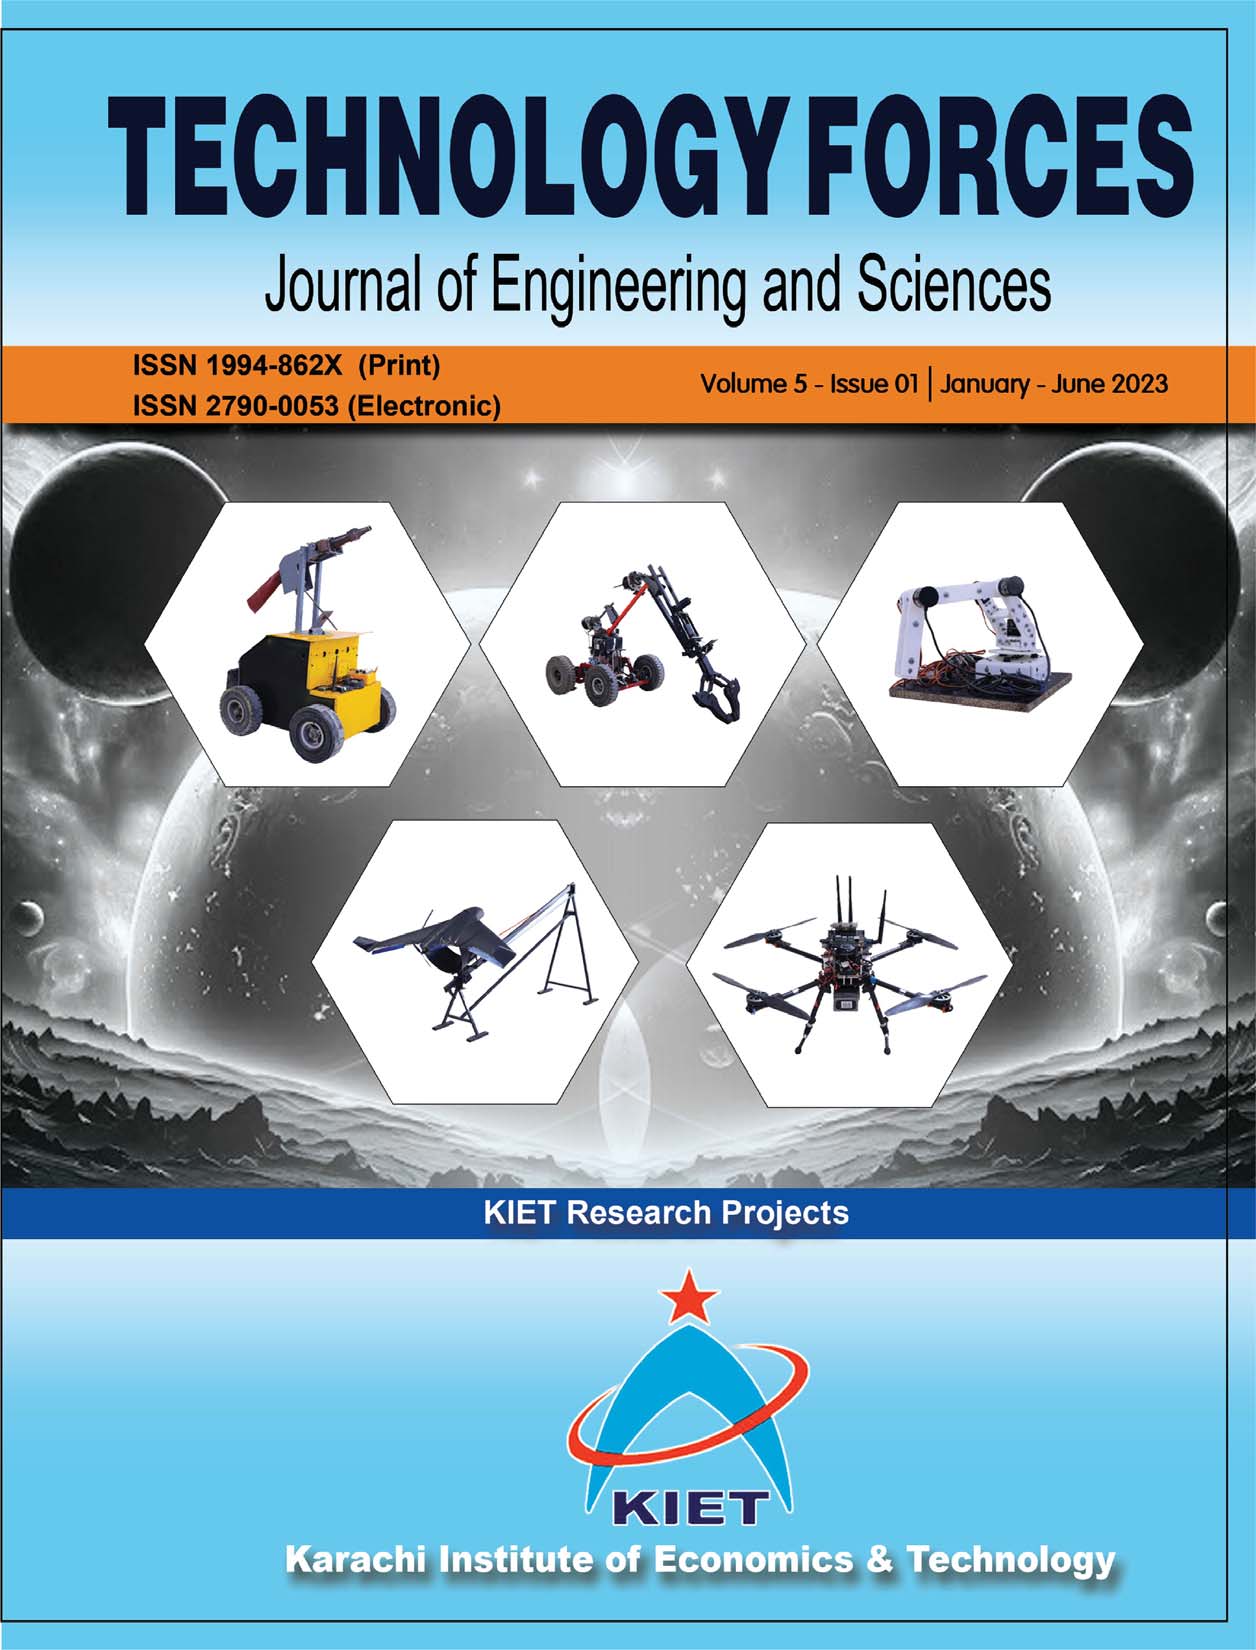 					View Vol. 5 No. 1 (2023): Technology Forces Journal of Engineering and Sciences
				